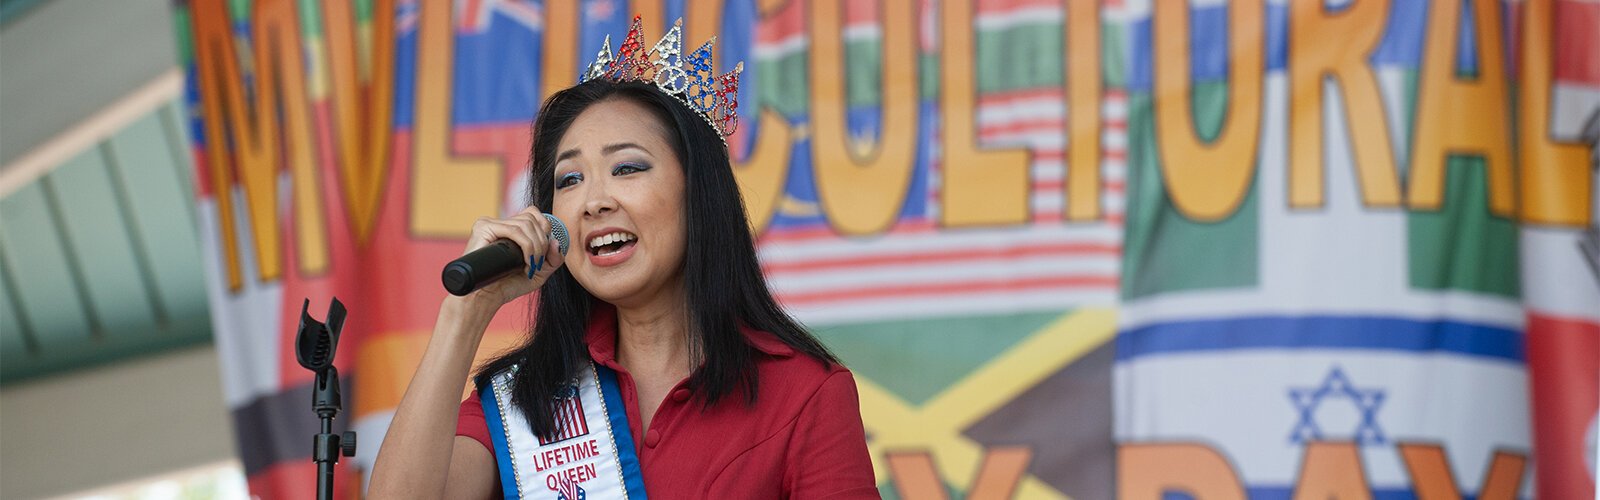 Ann Poonkasem (aka Ann P) sings the National Anthem to officially open the Multicultural Family Day event at Water Works Park on Sunday, May 1.